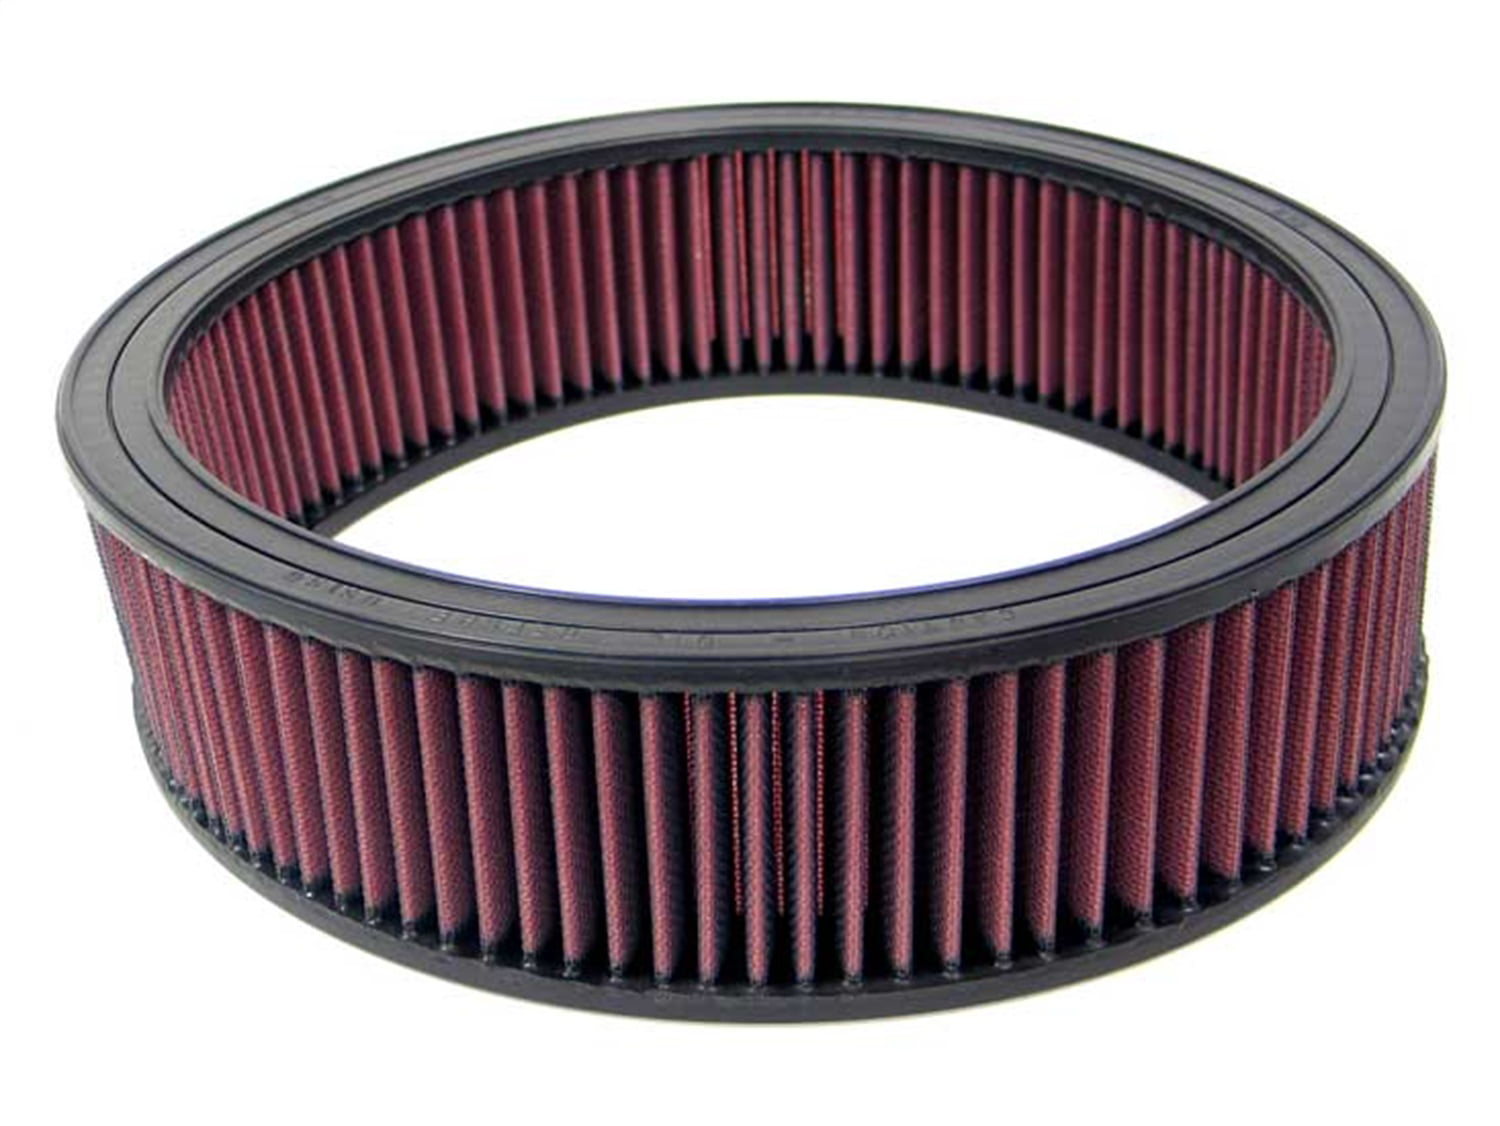 B1500 E-1100 B2500 K&N Replacement Air Filter for Dodge Ram 2500